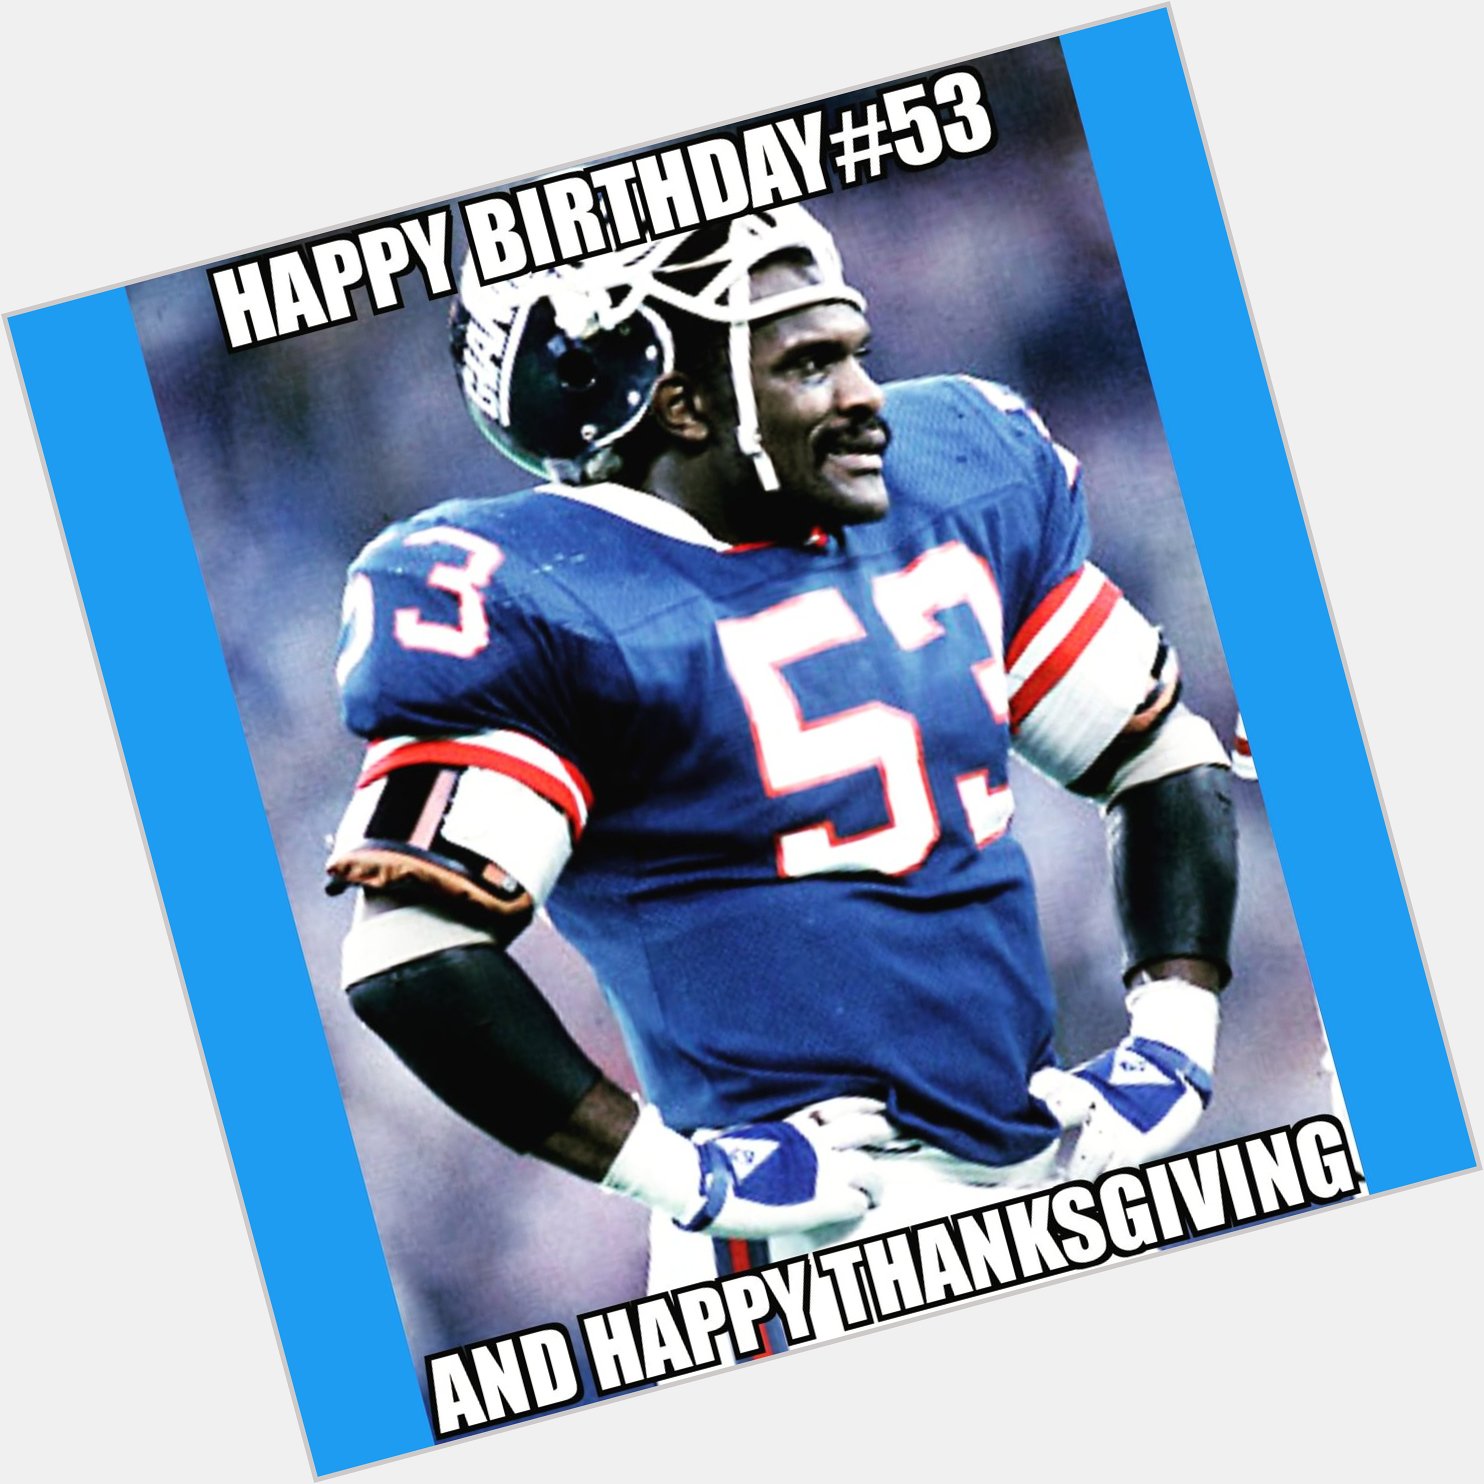 HAPPY BIRTHDAY TO THE GREAT HARRY CARSON  AND A HAPPY THANKSGIVING TO ALL 